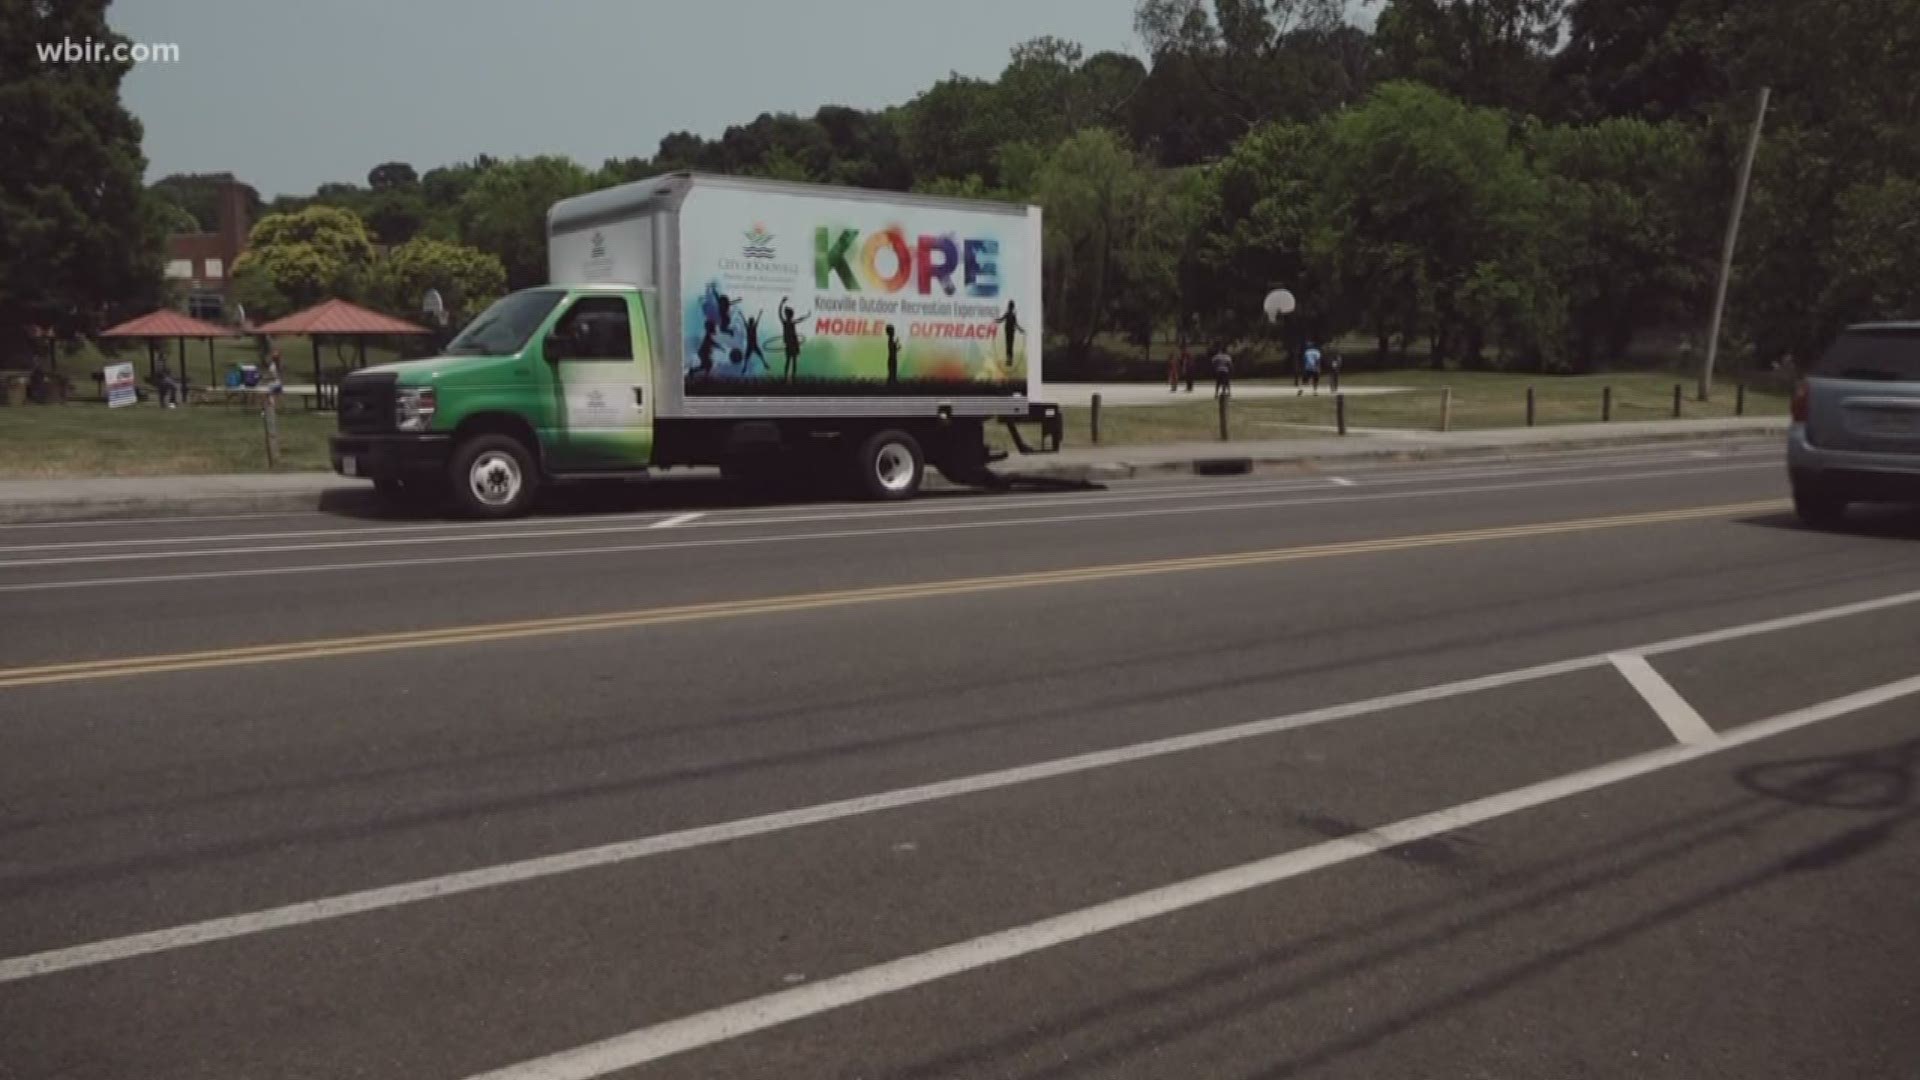 THE TRAVELING PROGRAM WILL VISIT DIFFERENT KNOXVILLE PARKS EVERY DAY MONDAY THROUGH THURSDAY.